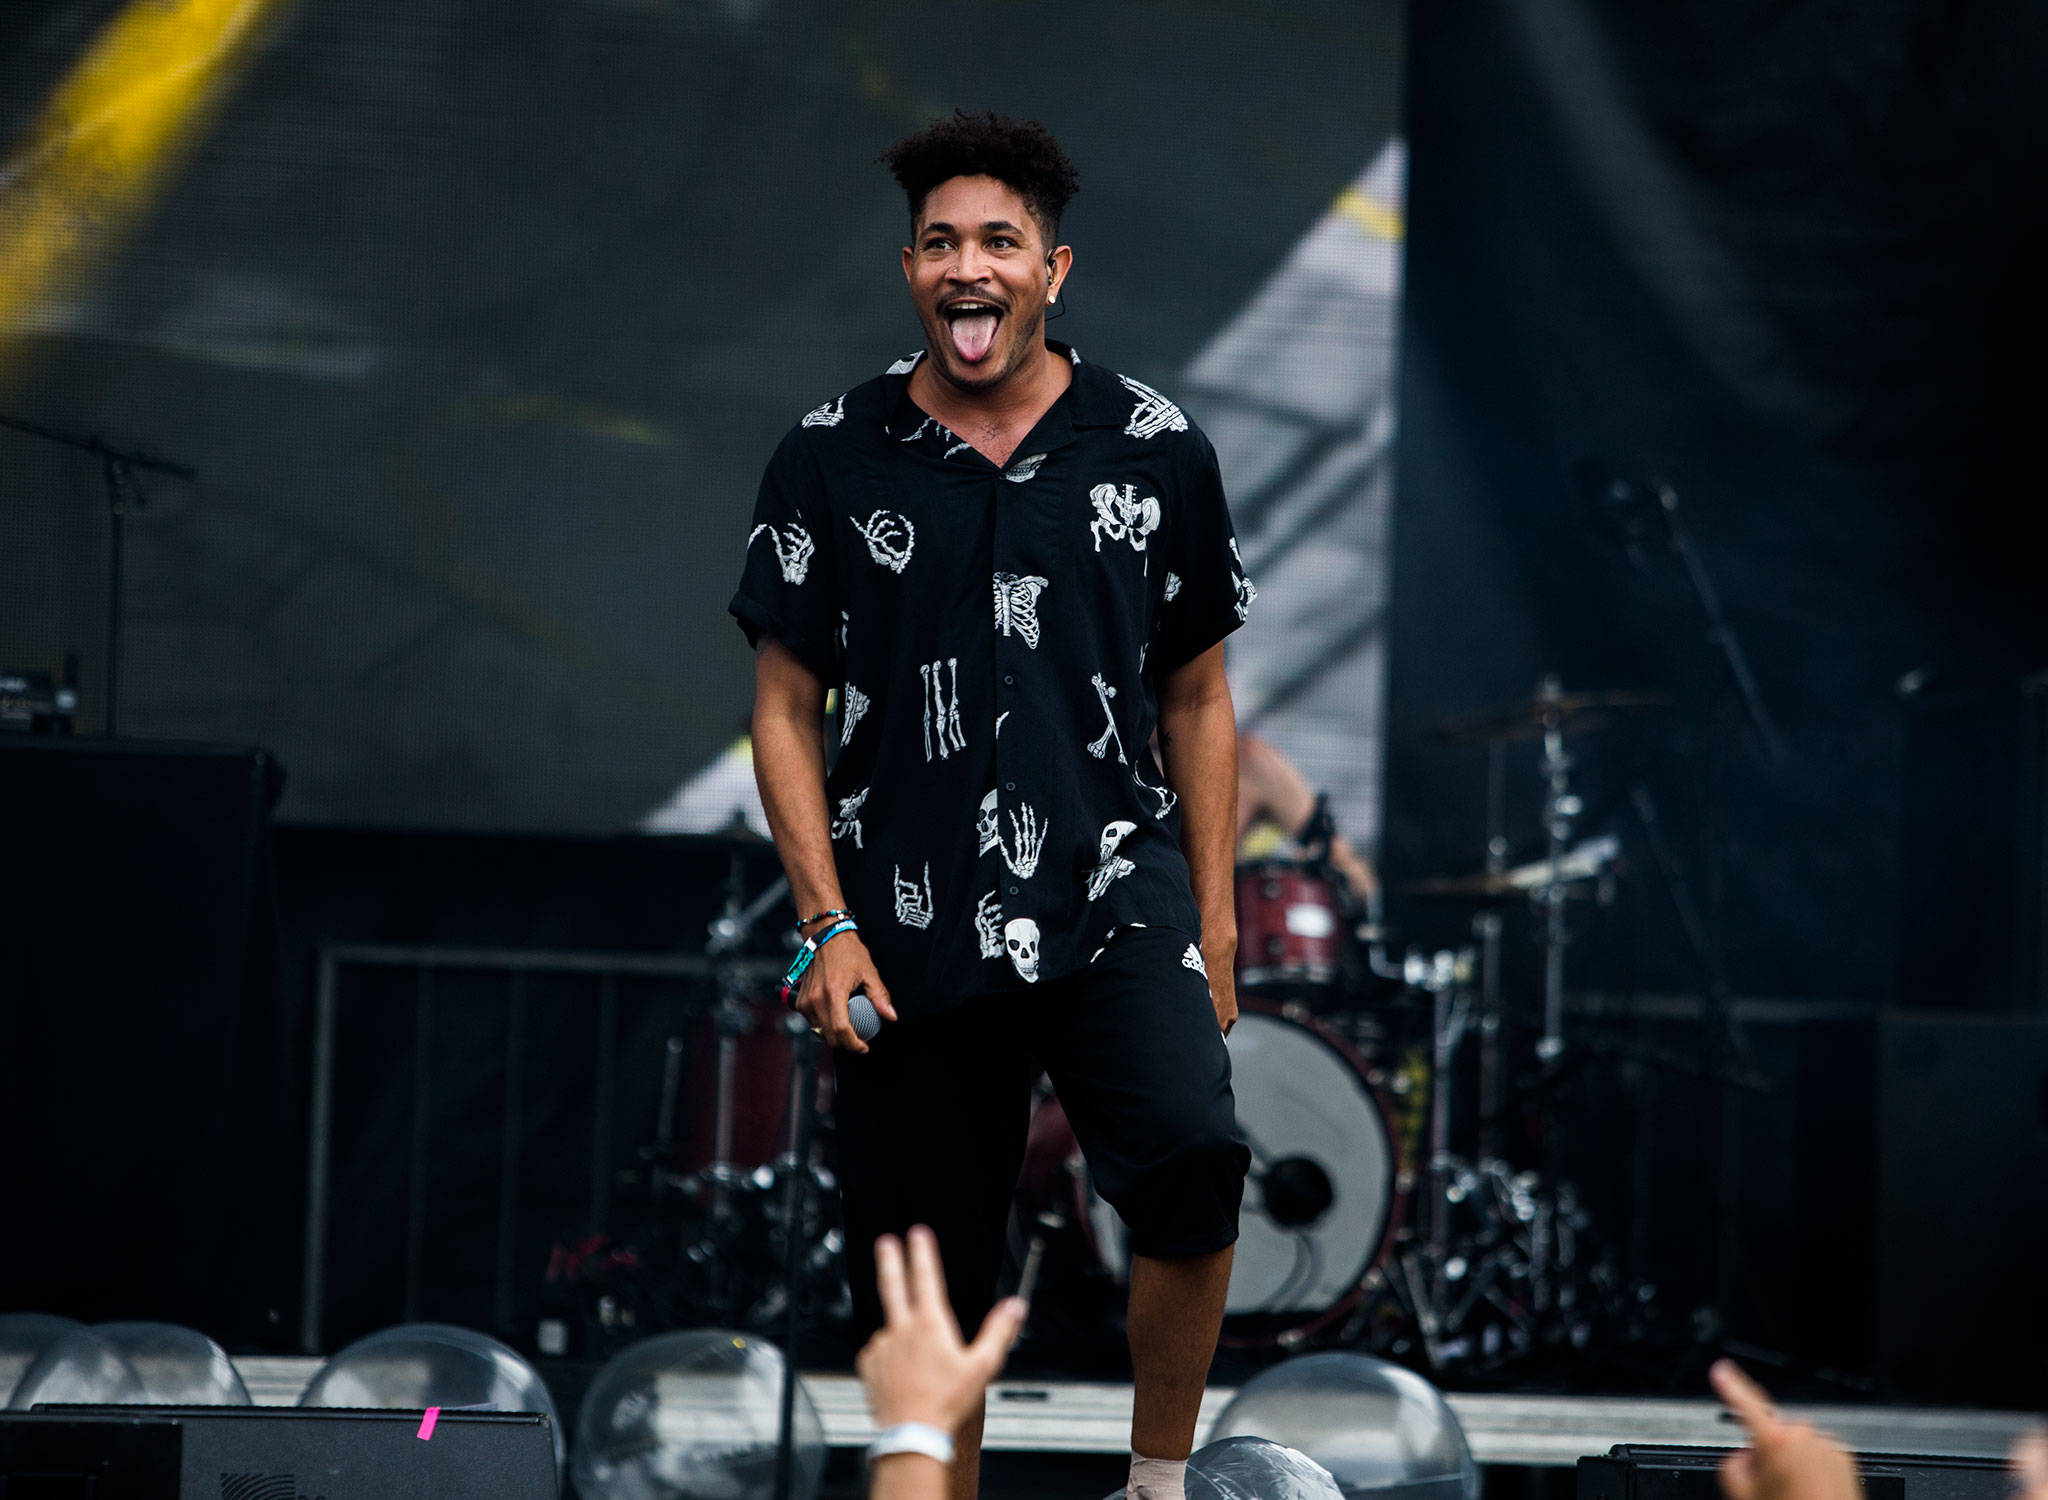 Bryce Vine sticks his tongue out during his performance Bumbershoot Music & Arts Festival on Friday, Aug. 30, 2019 in Seattle, Wash. (Olivia Vanni / The Herald)